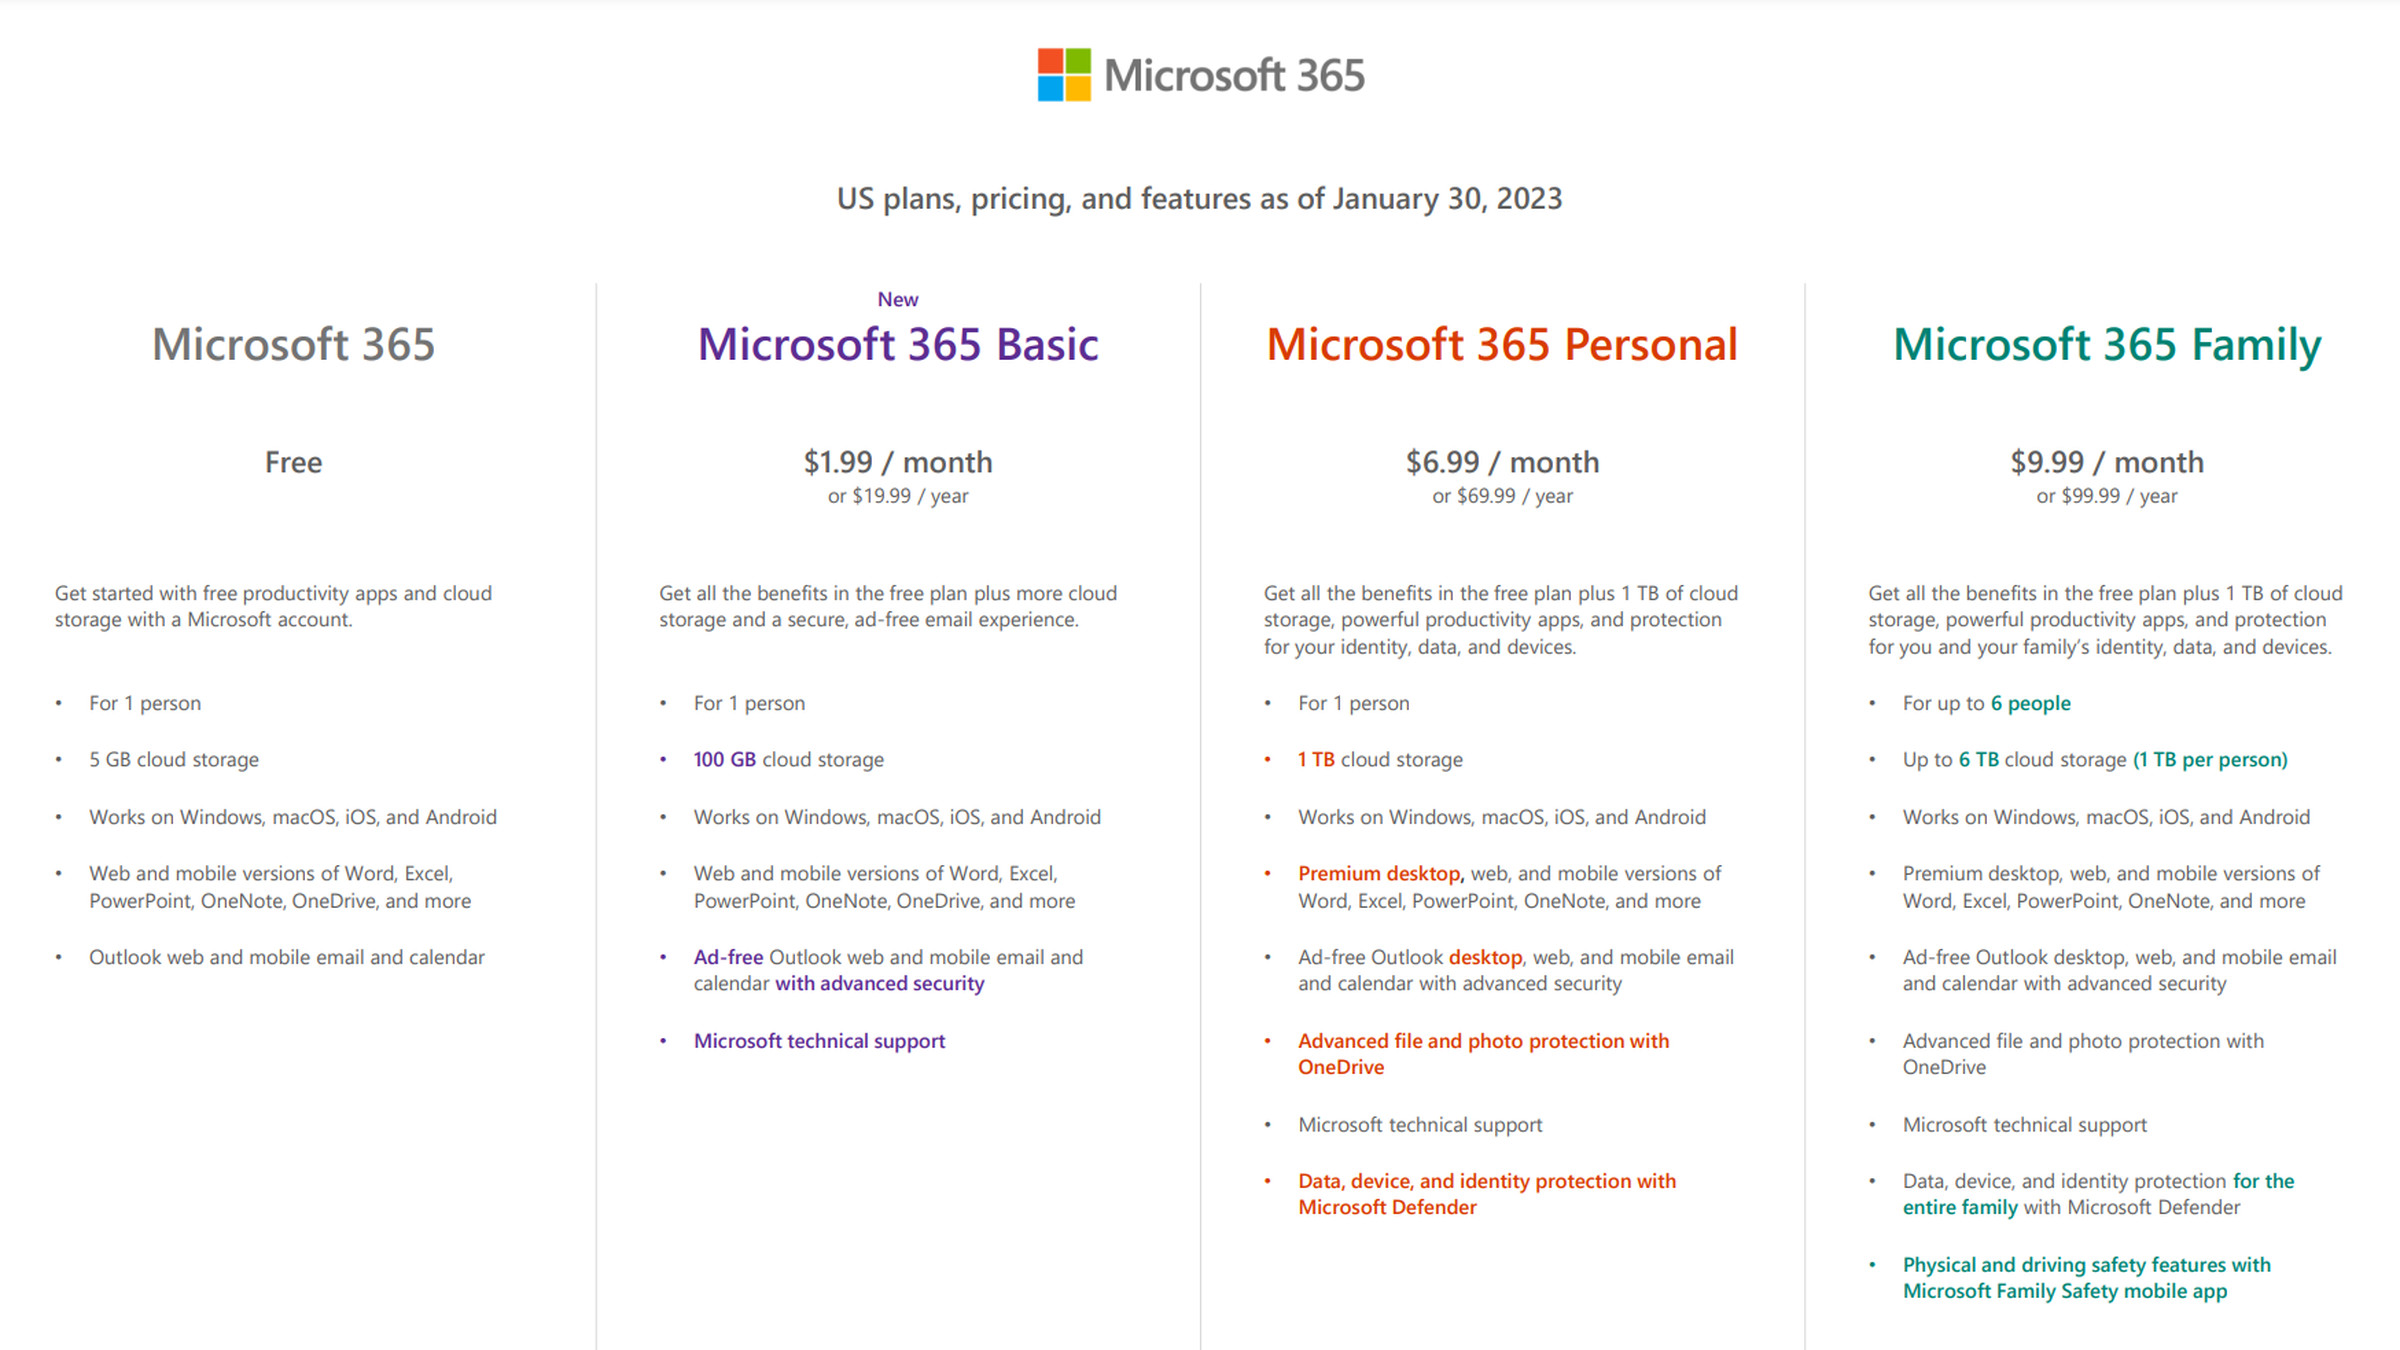 Microsoft 365 plans and pricing in the United States.